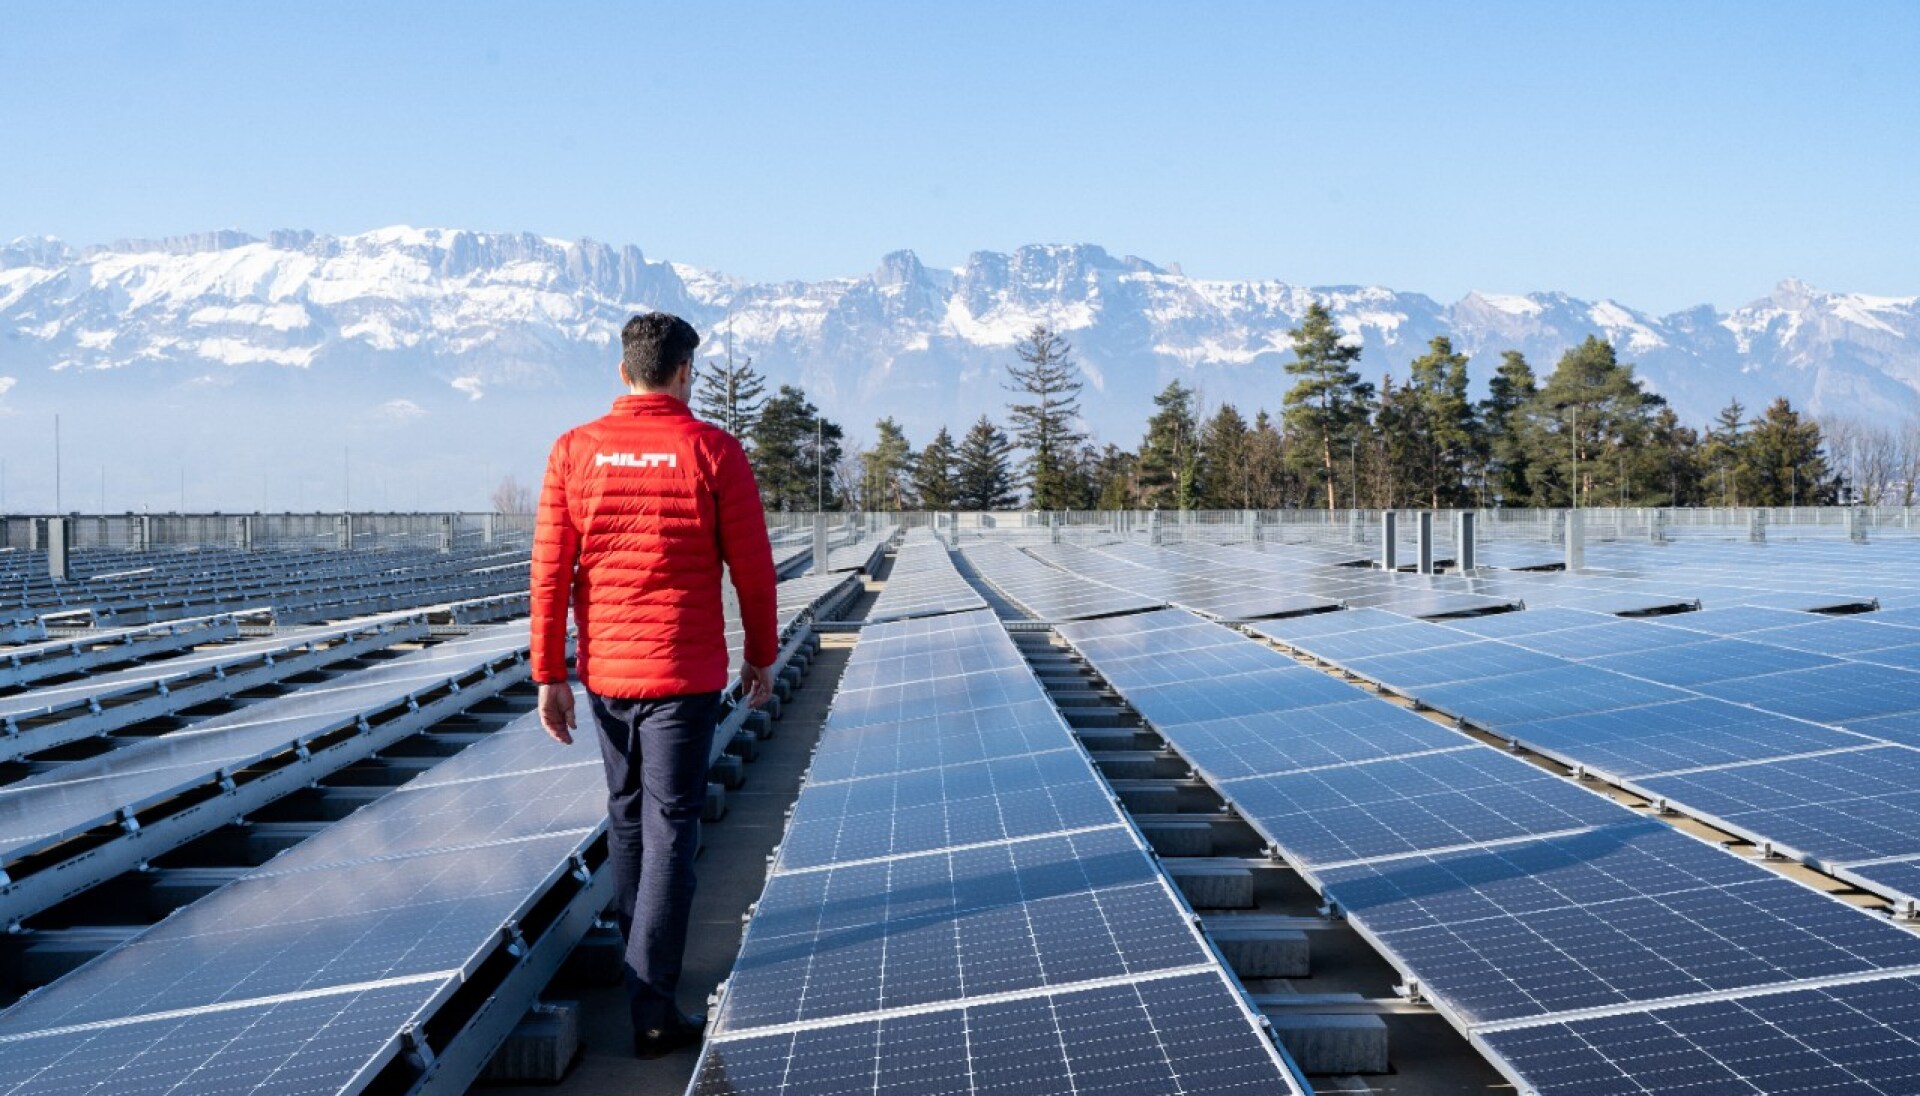 Man walking on roof next to solar panels in a mountain region.